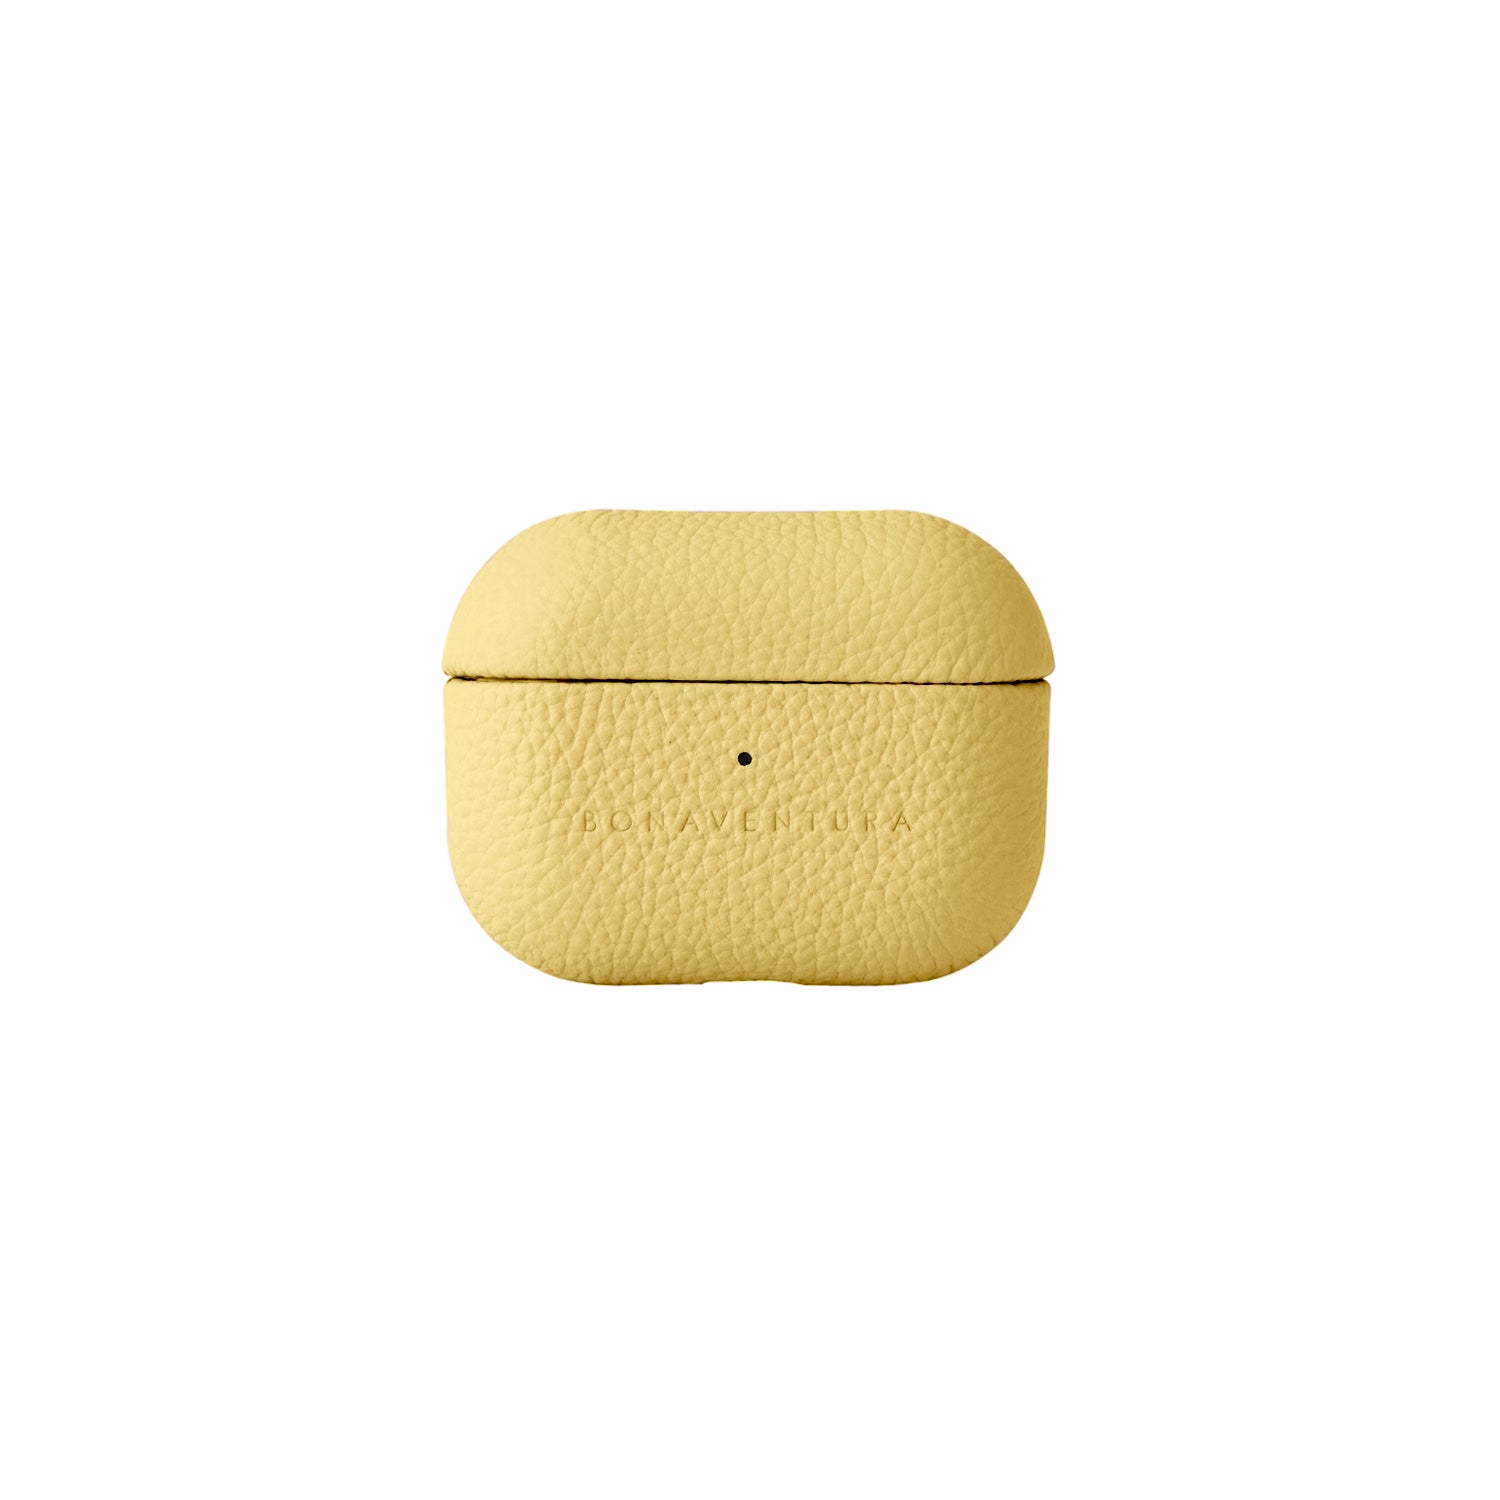 AirPods Pro Case Shrink Leather (AirPods Pro)